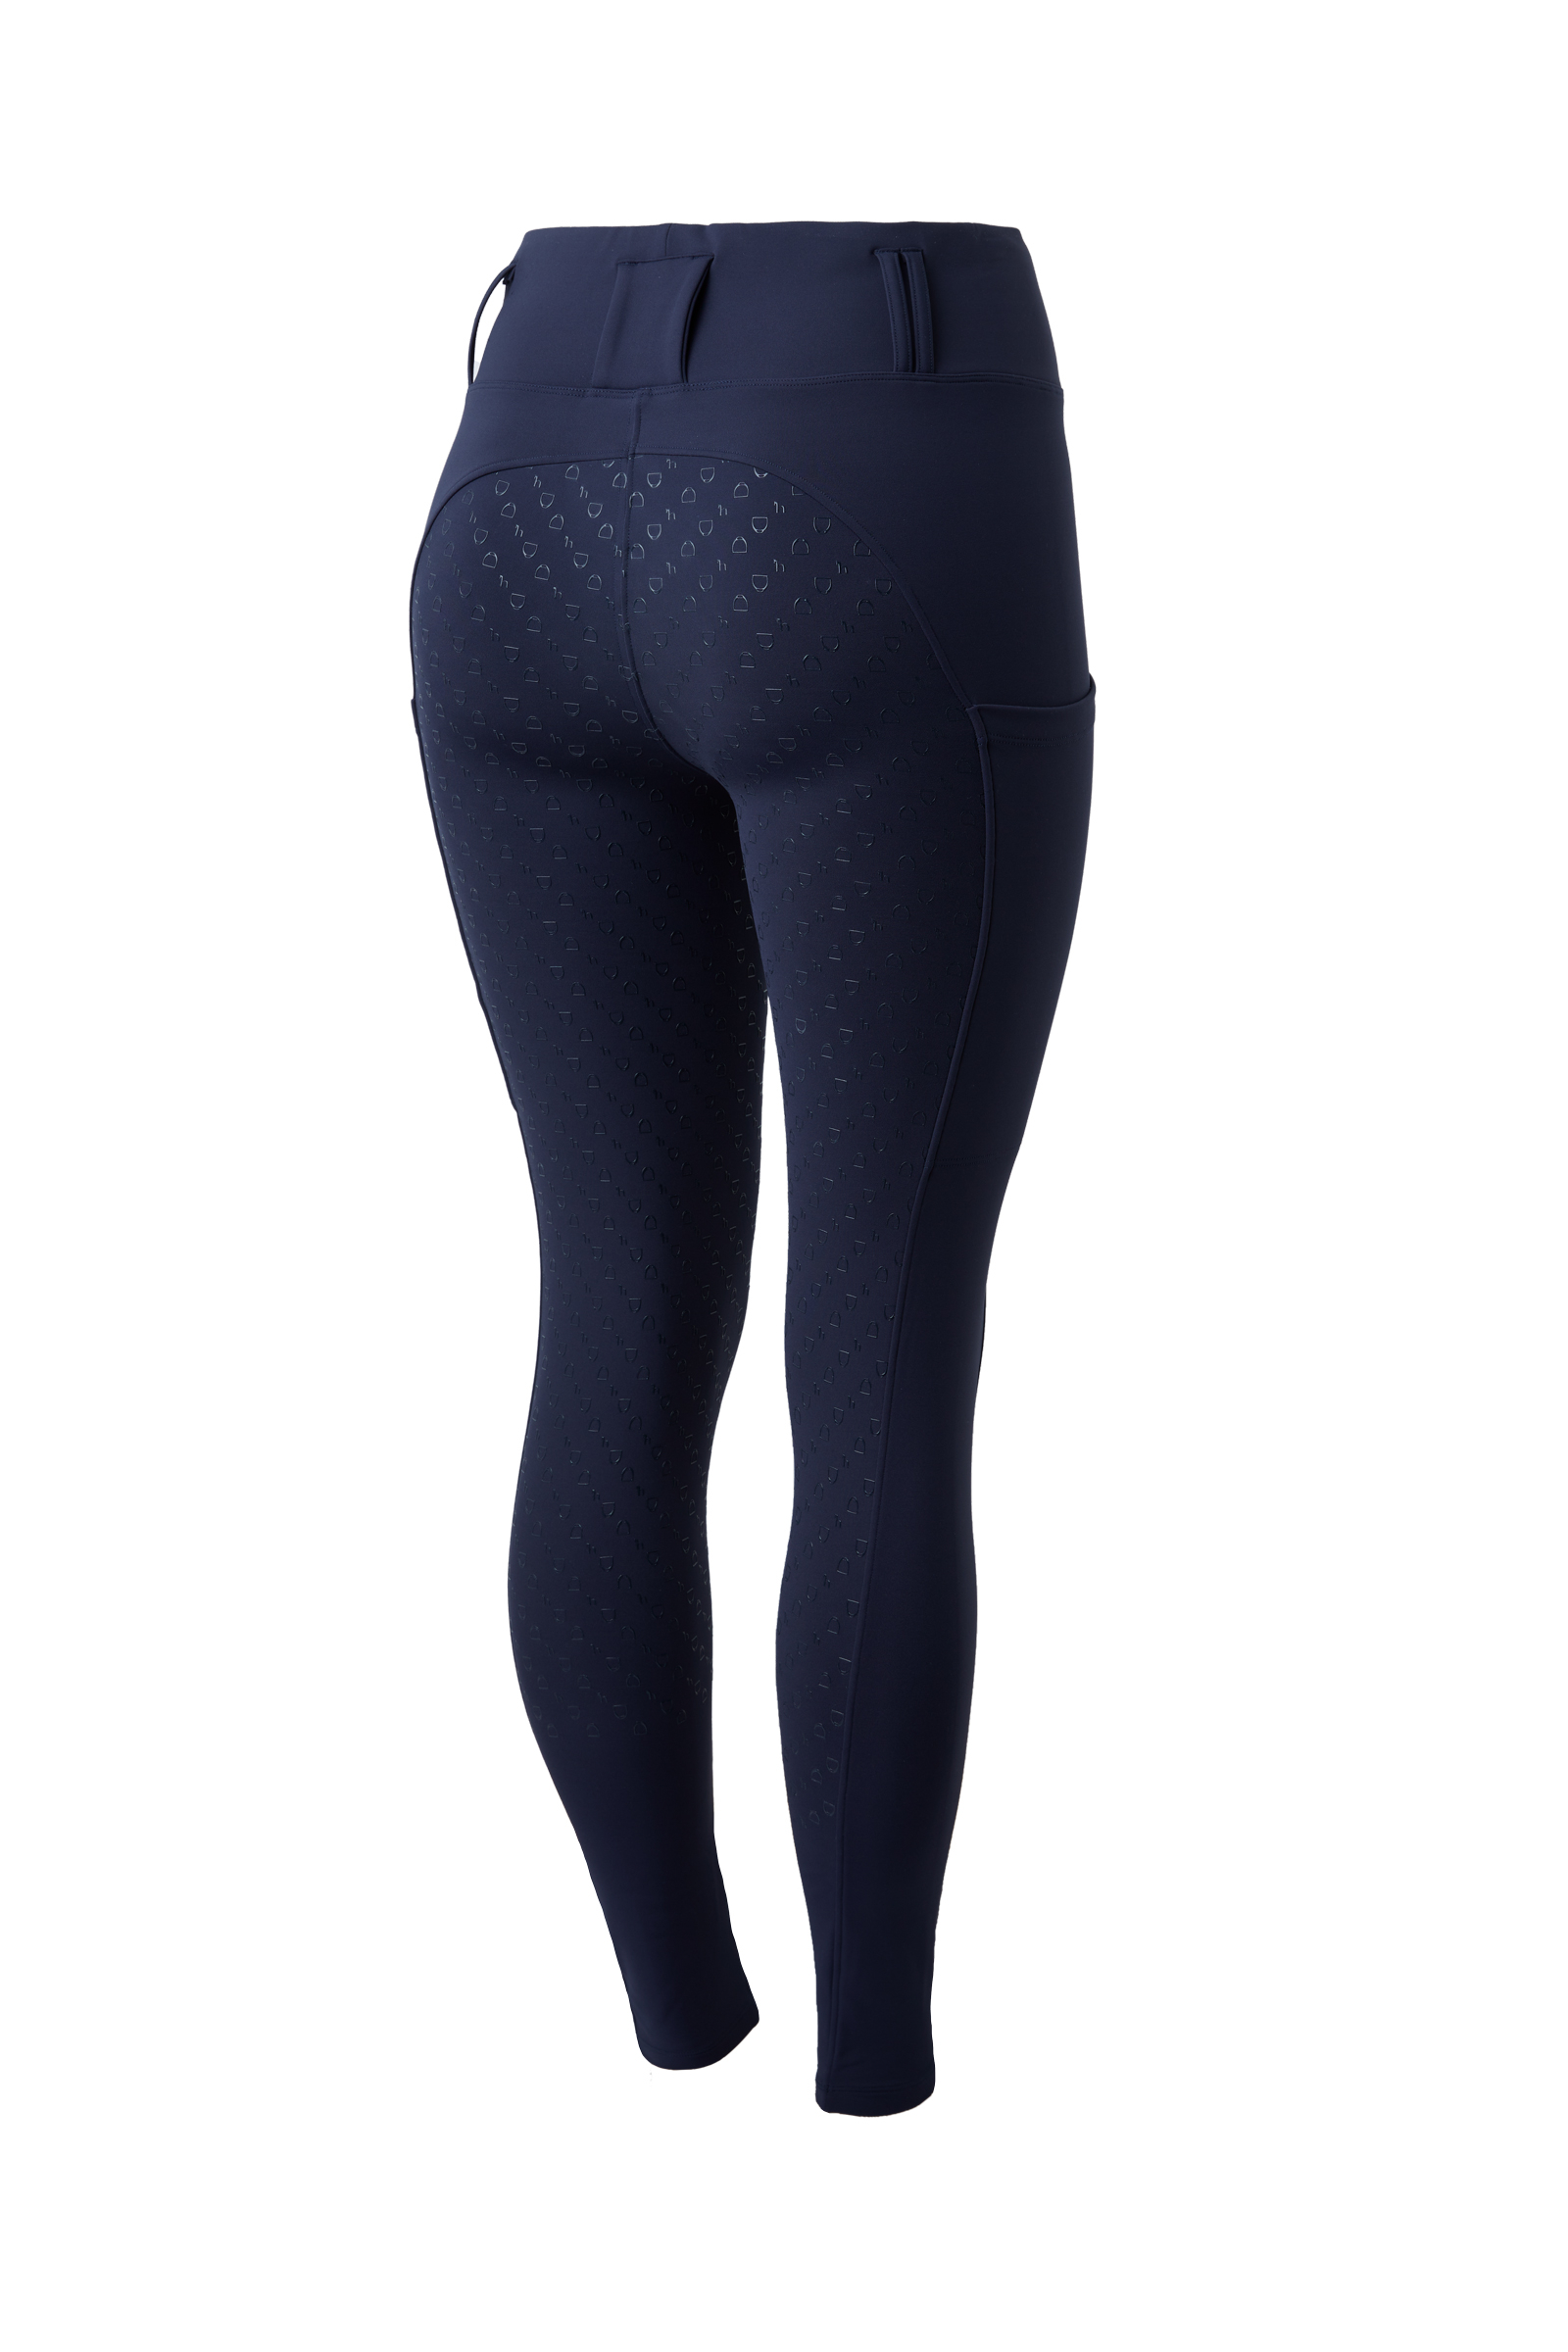 Buy Horze Everly Women's Full Grip Riding Tights